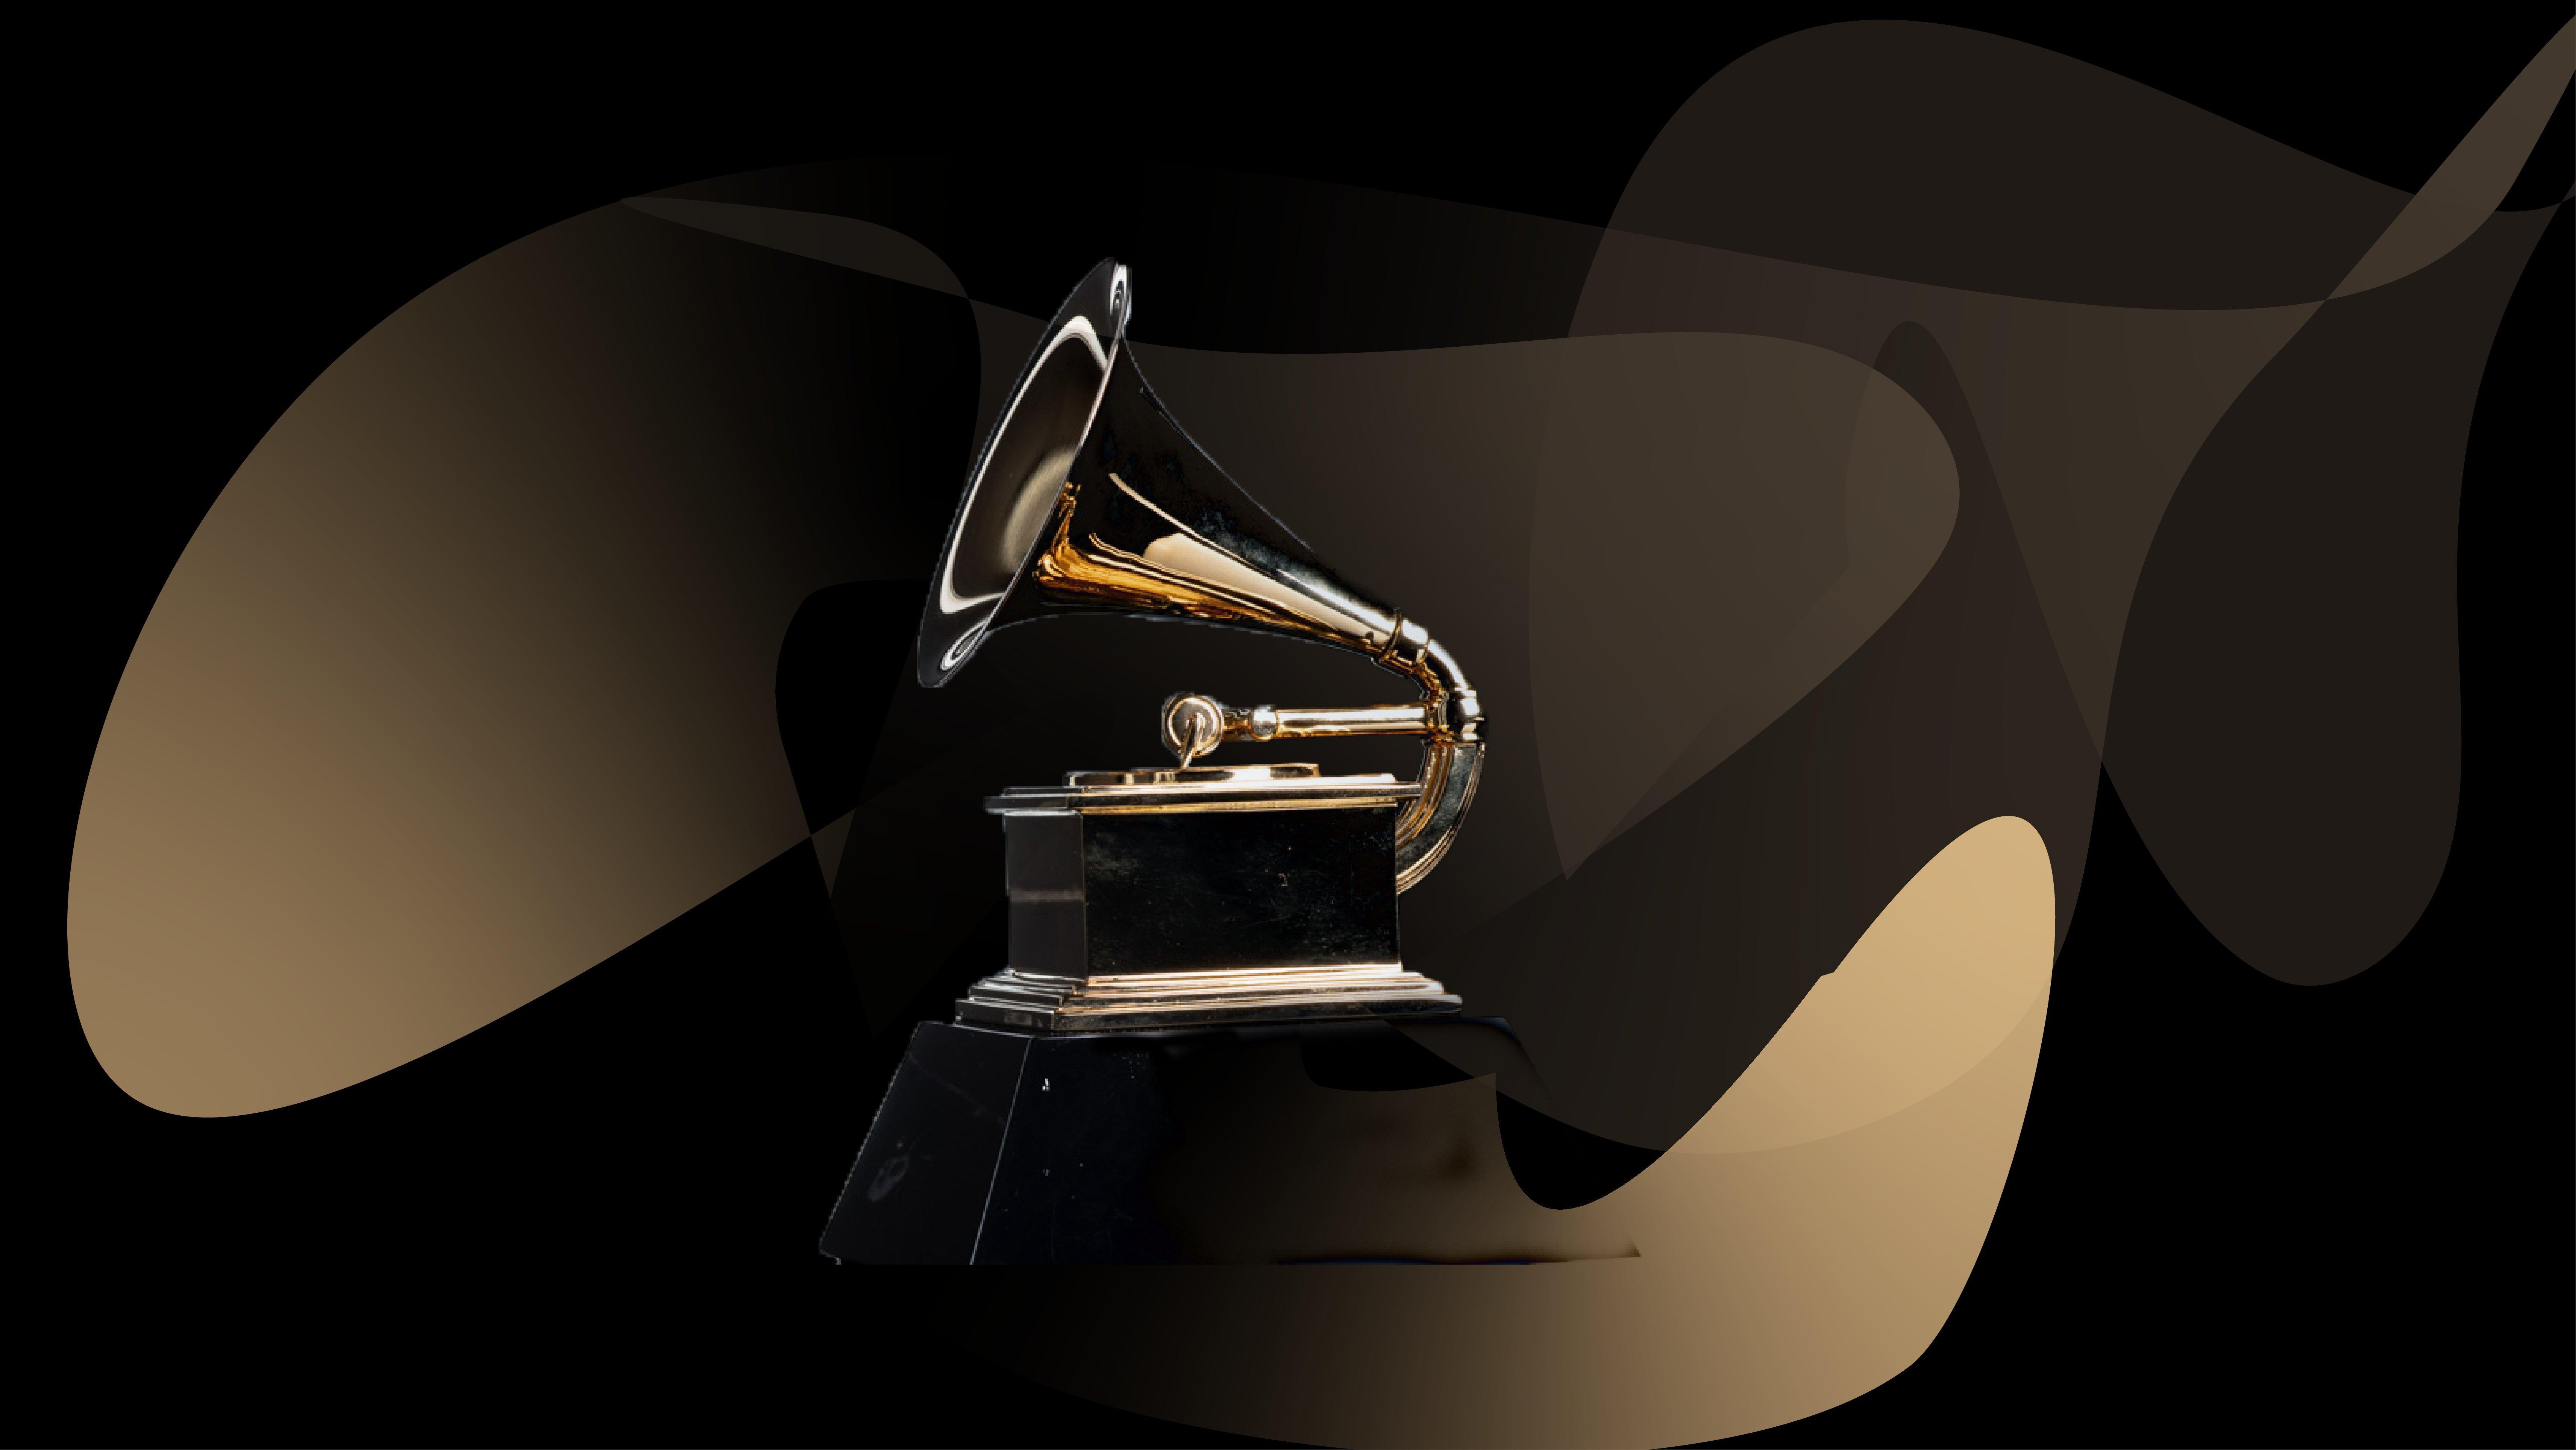 New Categories For The 2023 GRAMMYs Announced Songwriter Of The Year